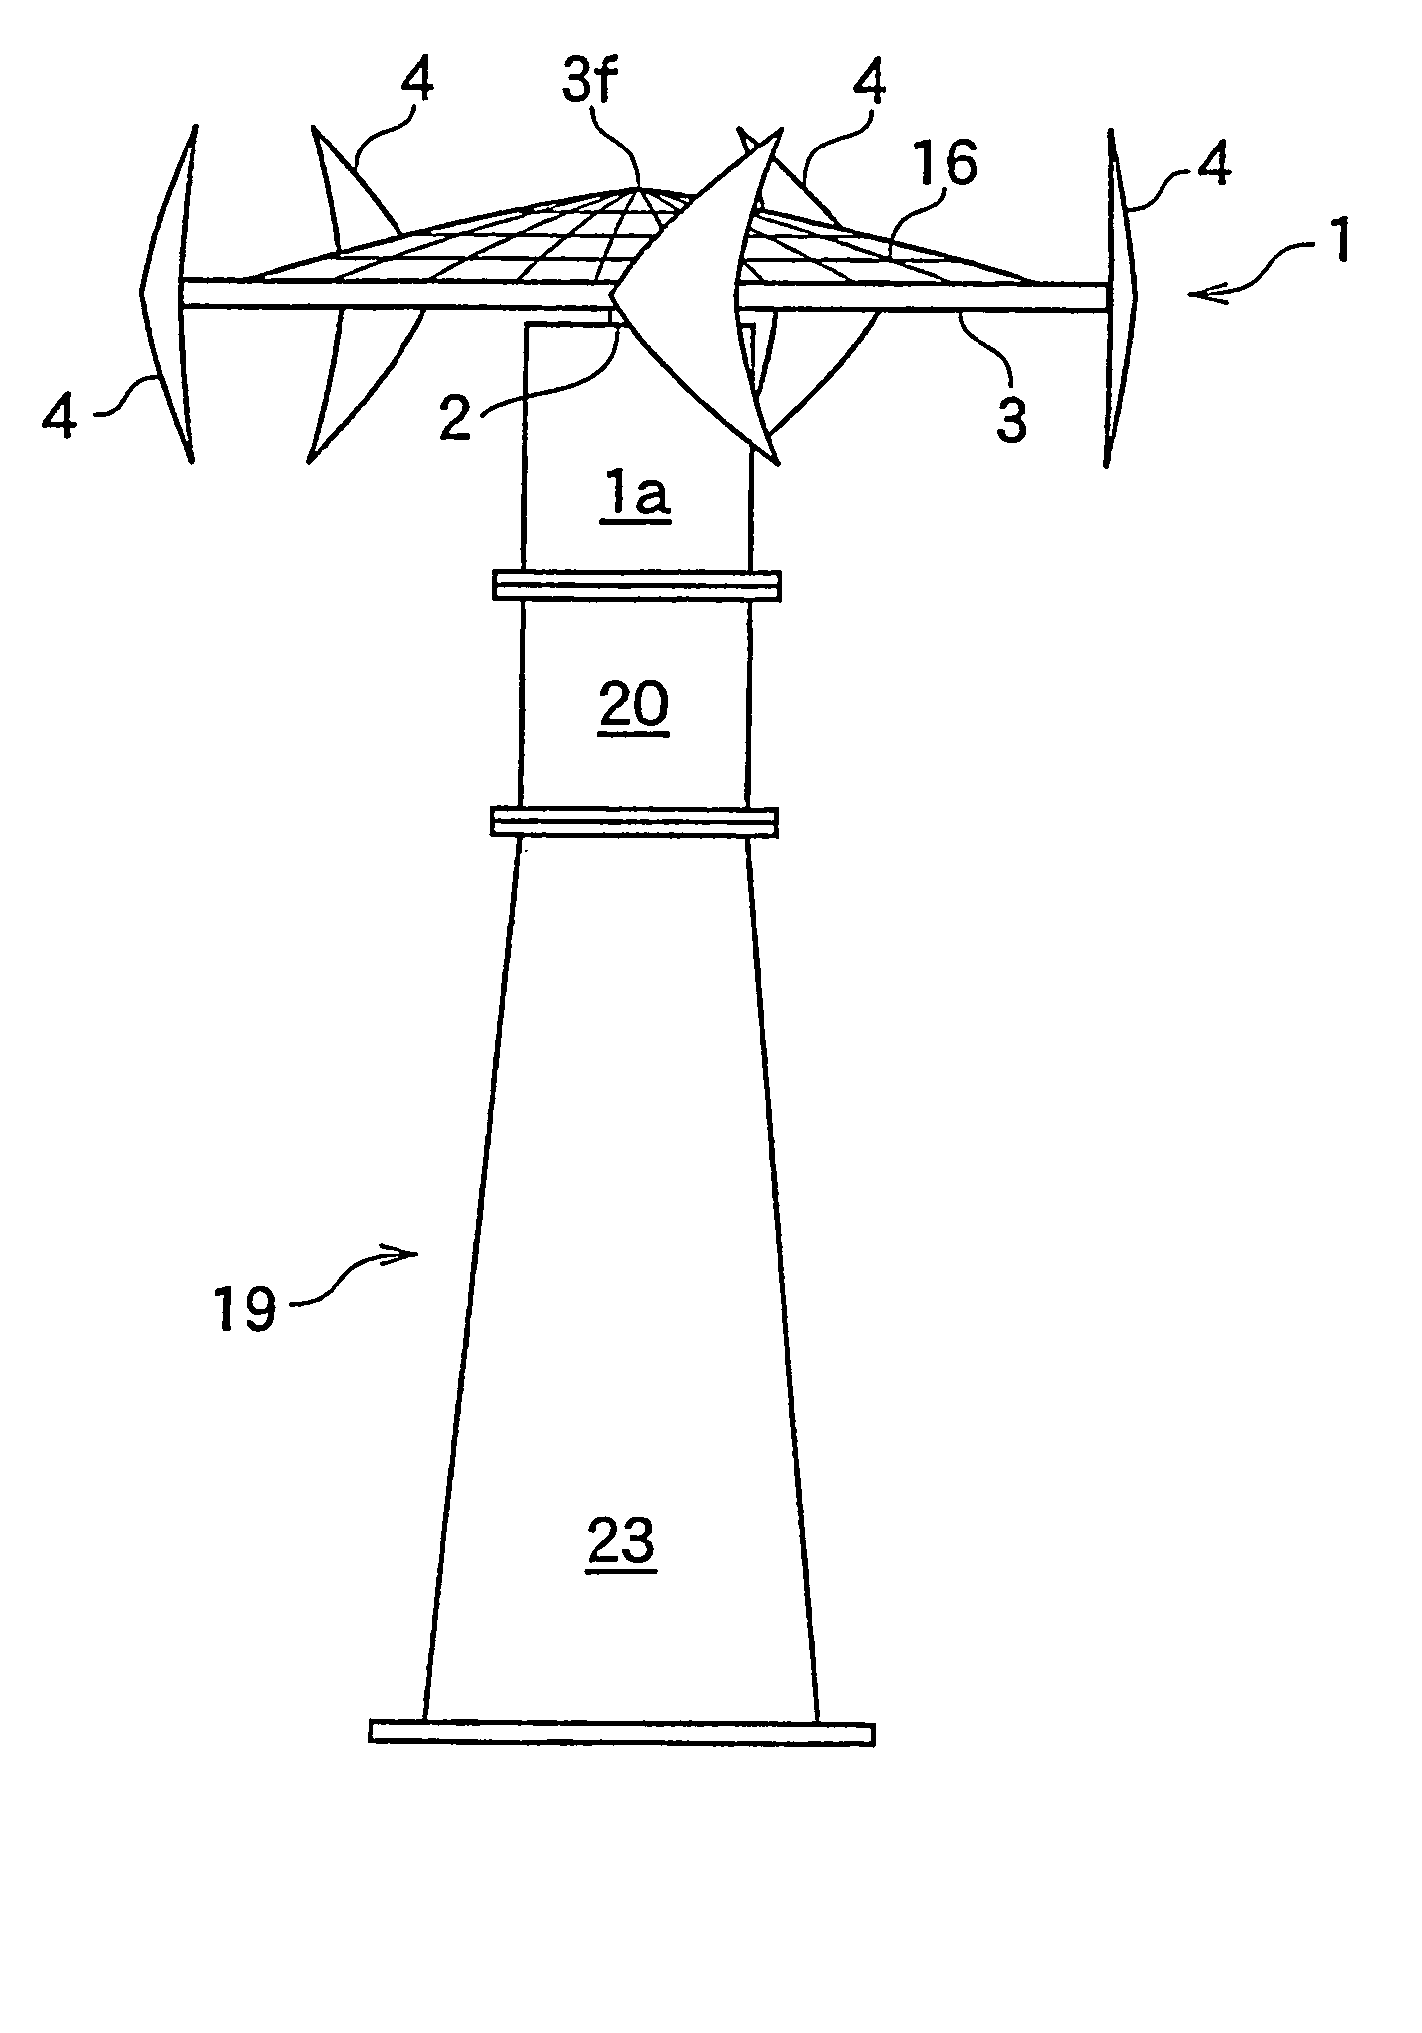 Wind power generator, windmill, and spindle and blade of the windmill